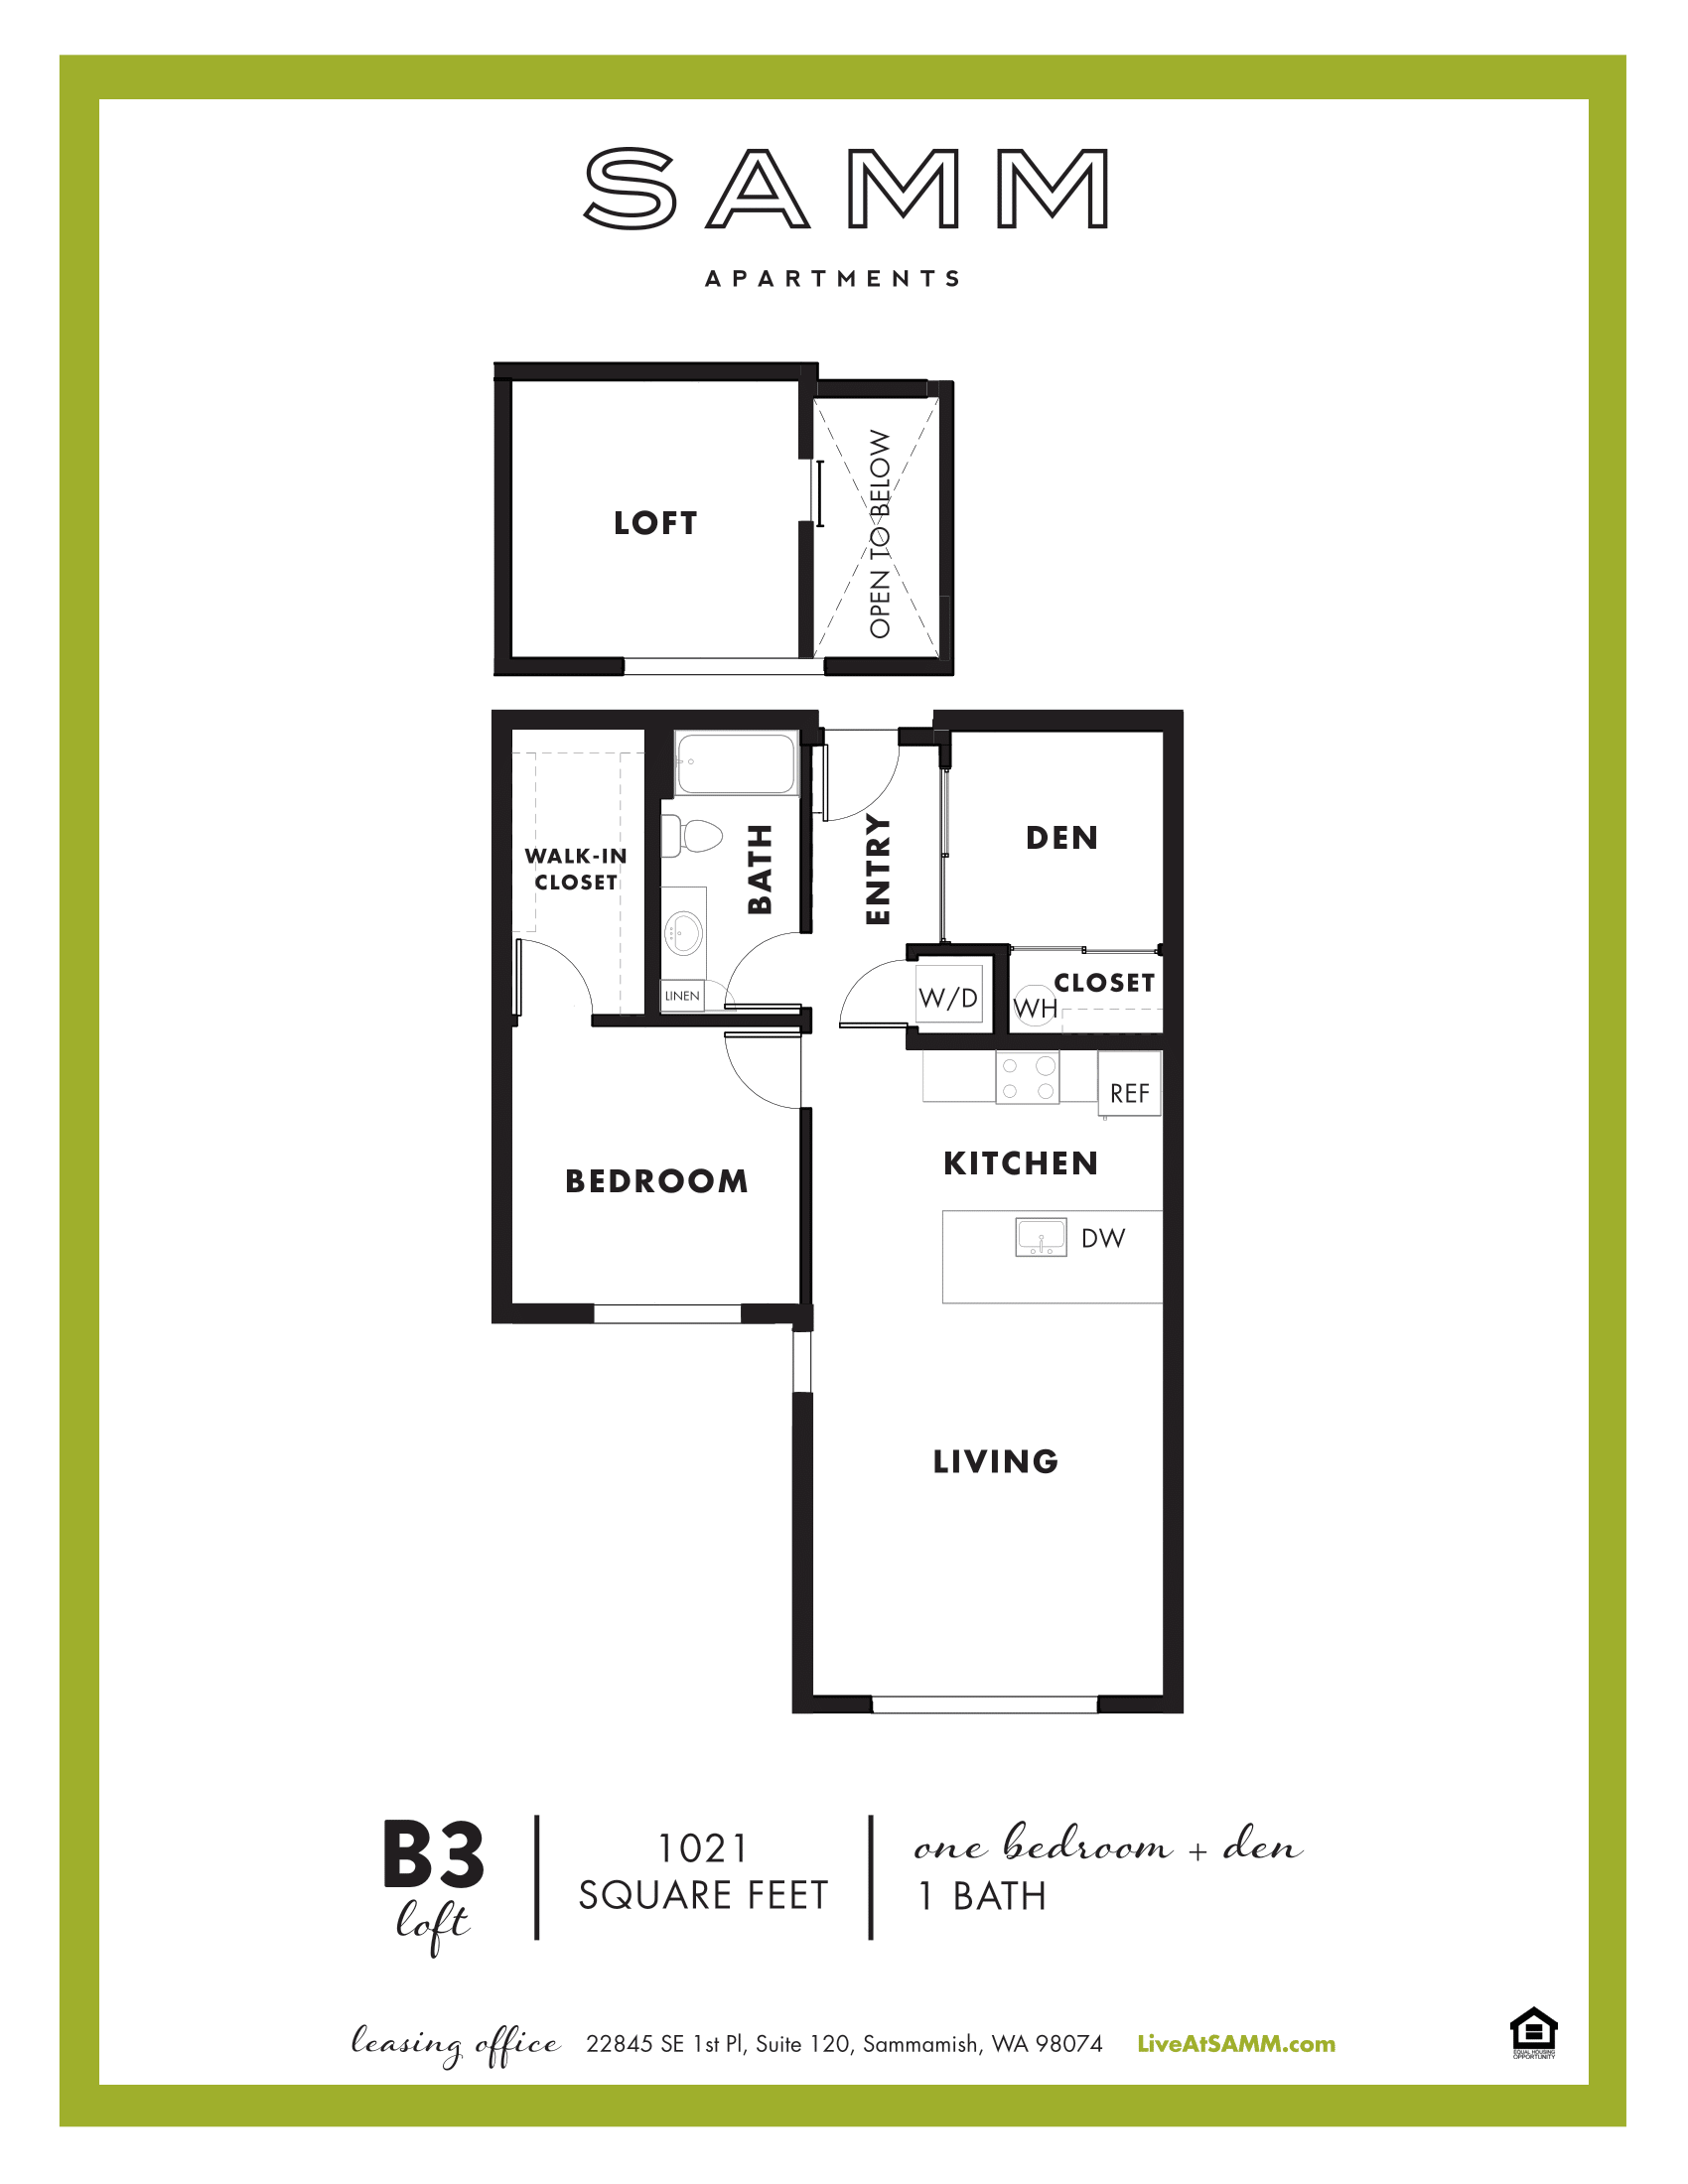 1 Bedroom 1 Bath with Den and Loft